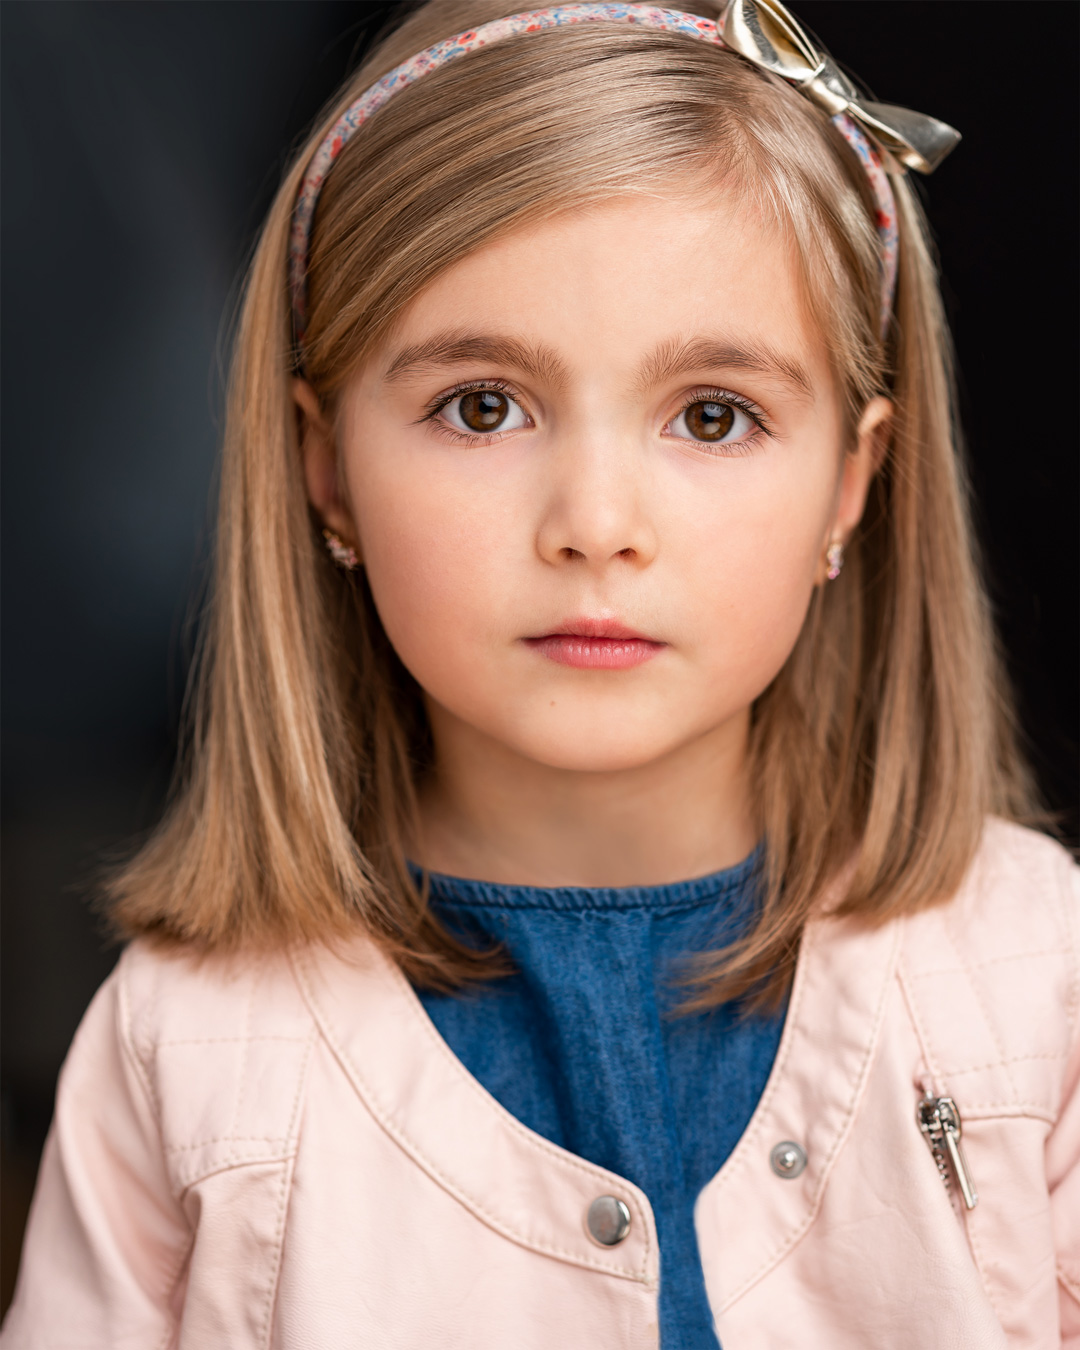 Professional aciting headshot for young child